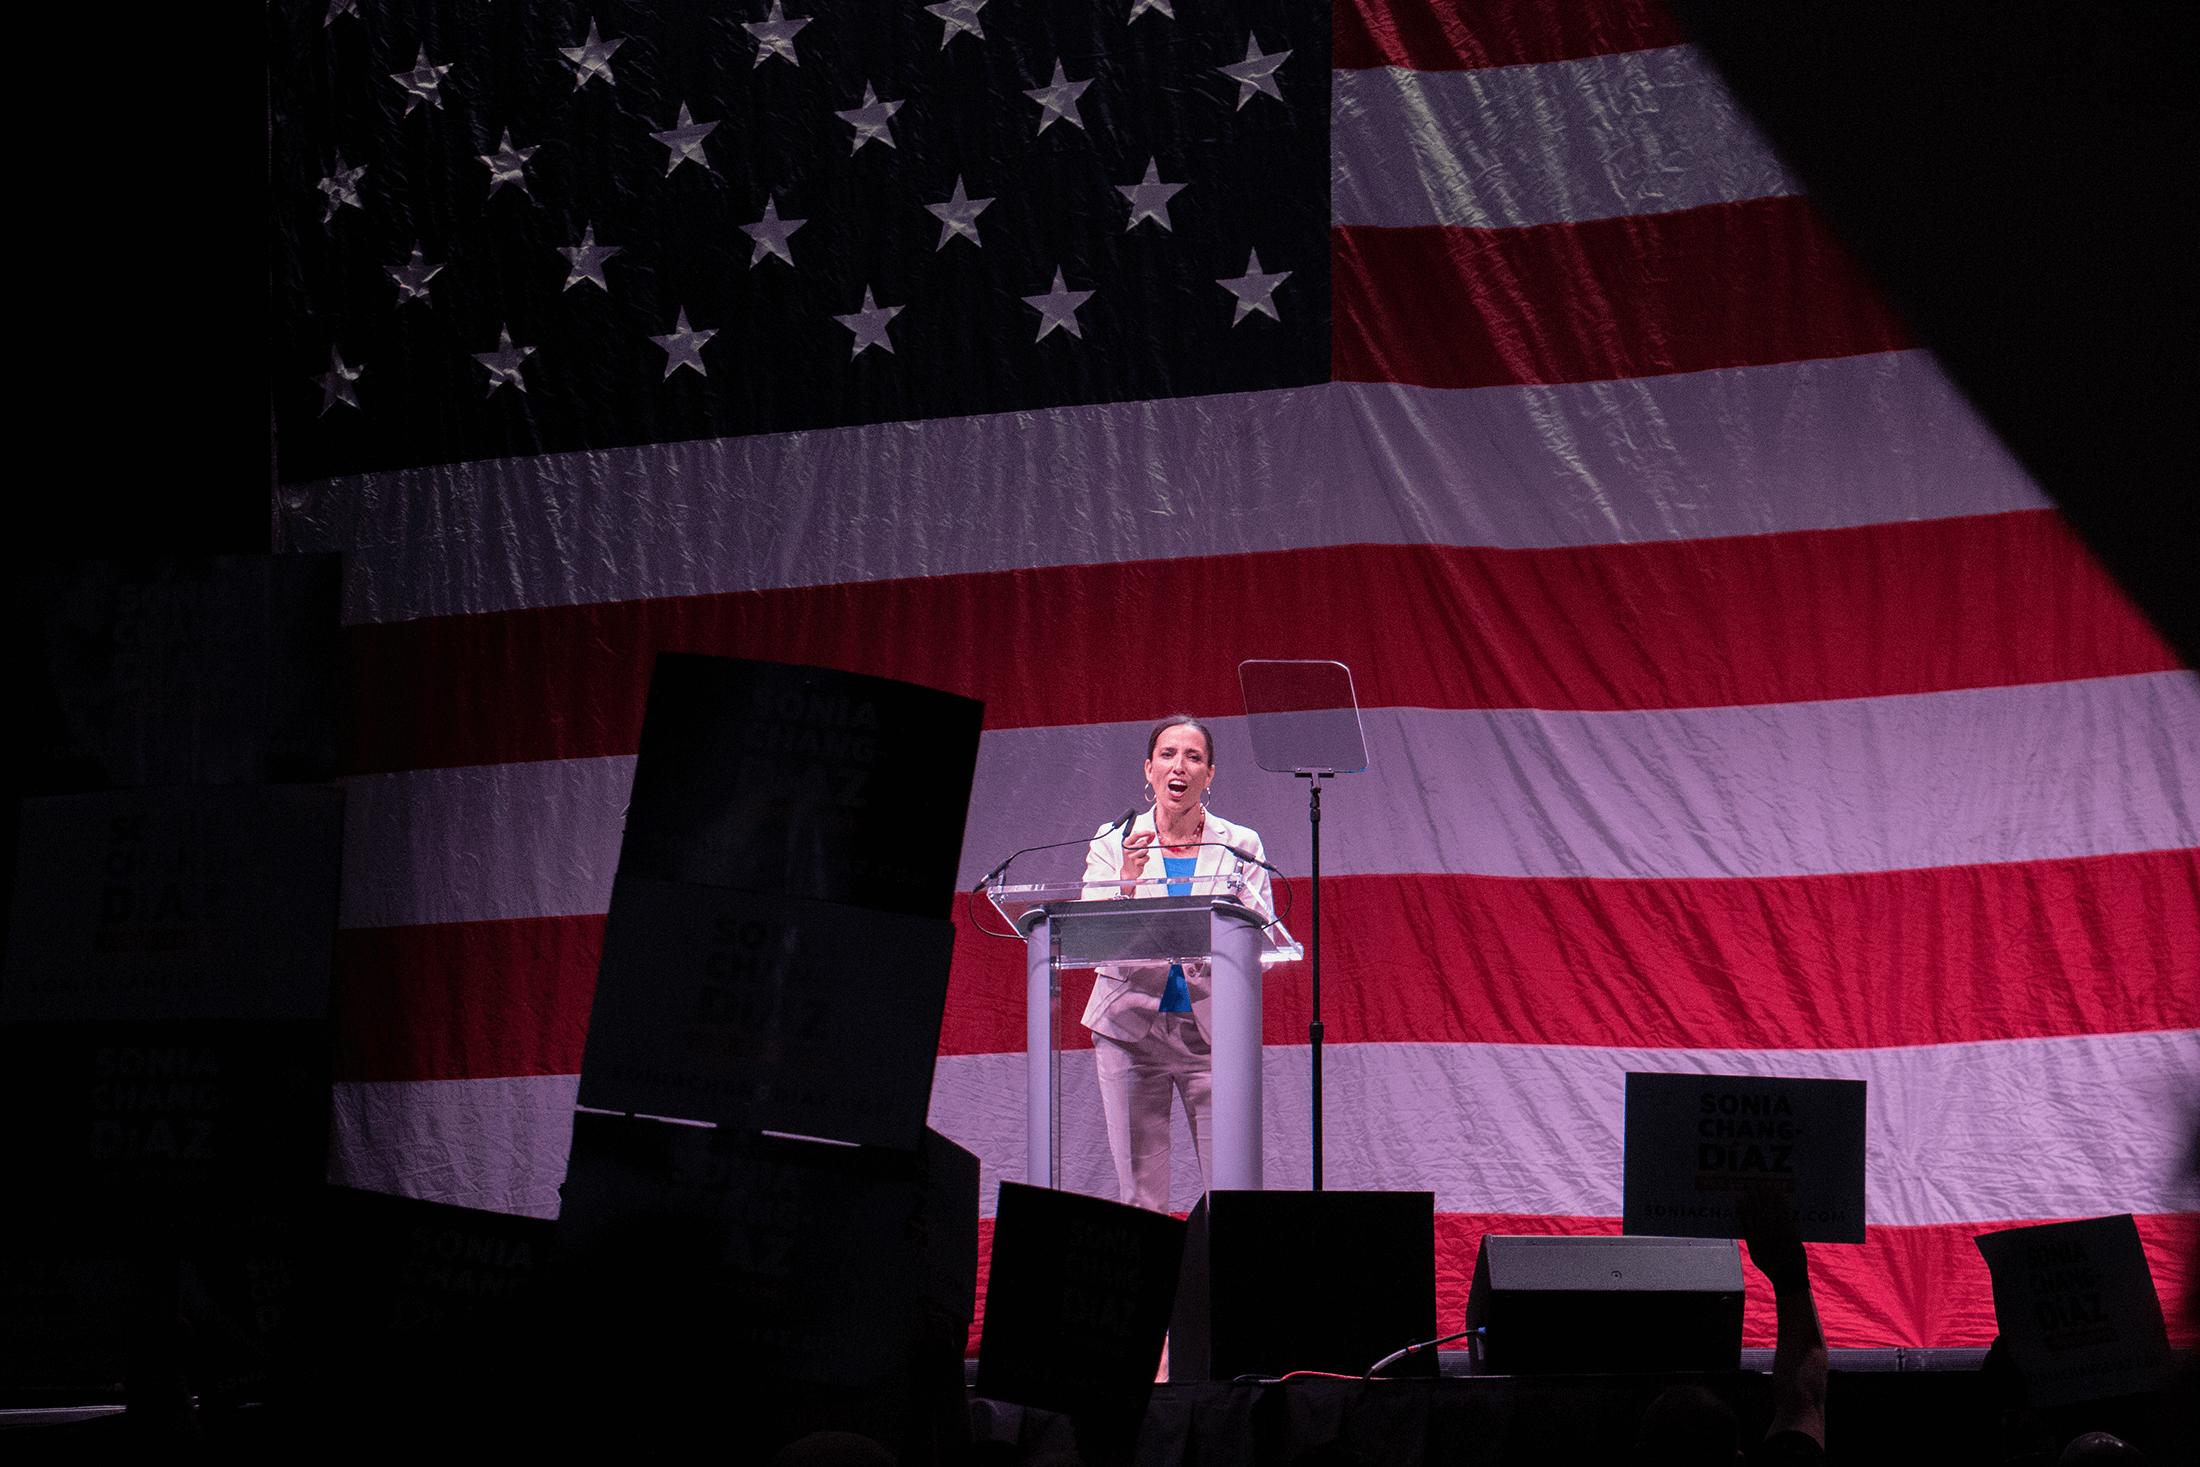 Sonia speaks in front of the American flag at the MA Democratic convention.